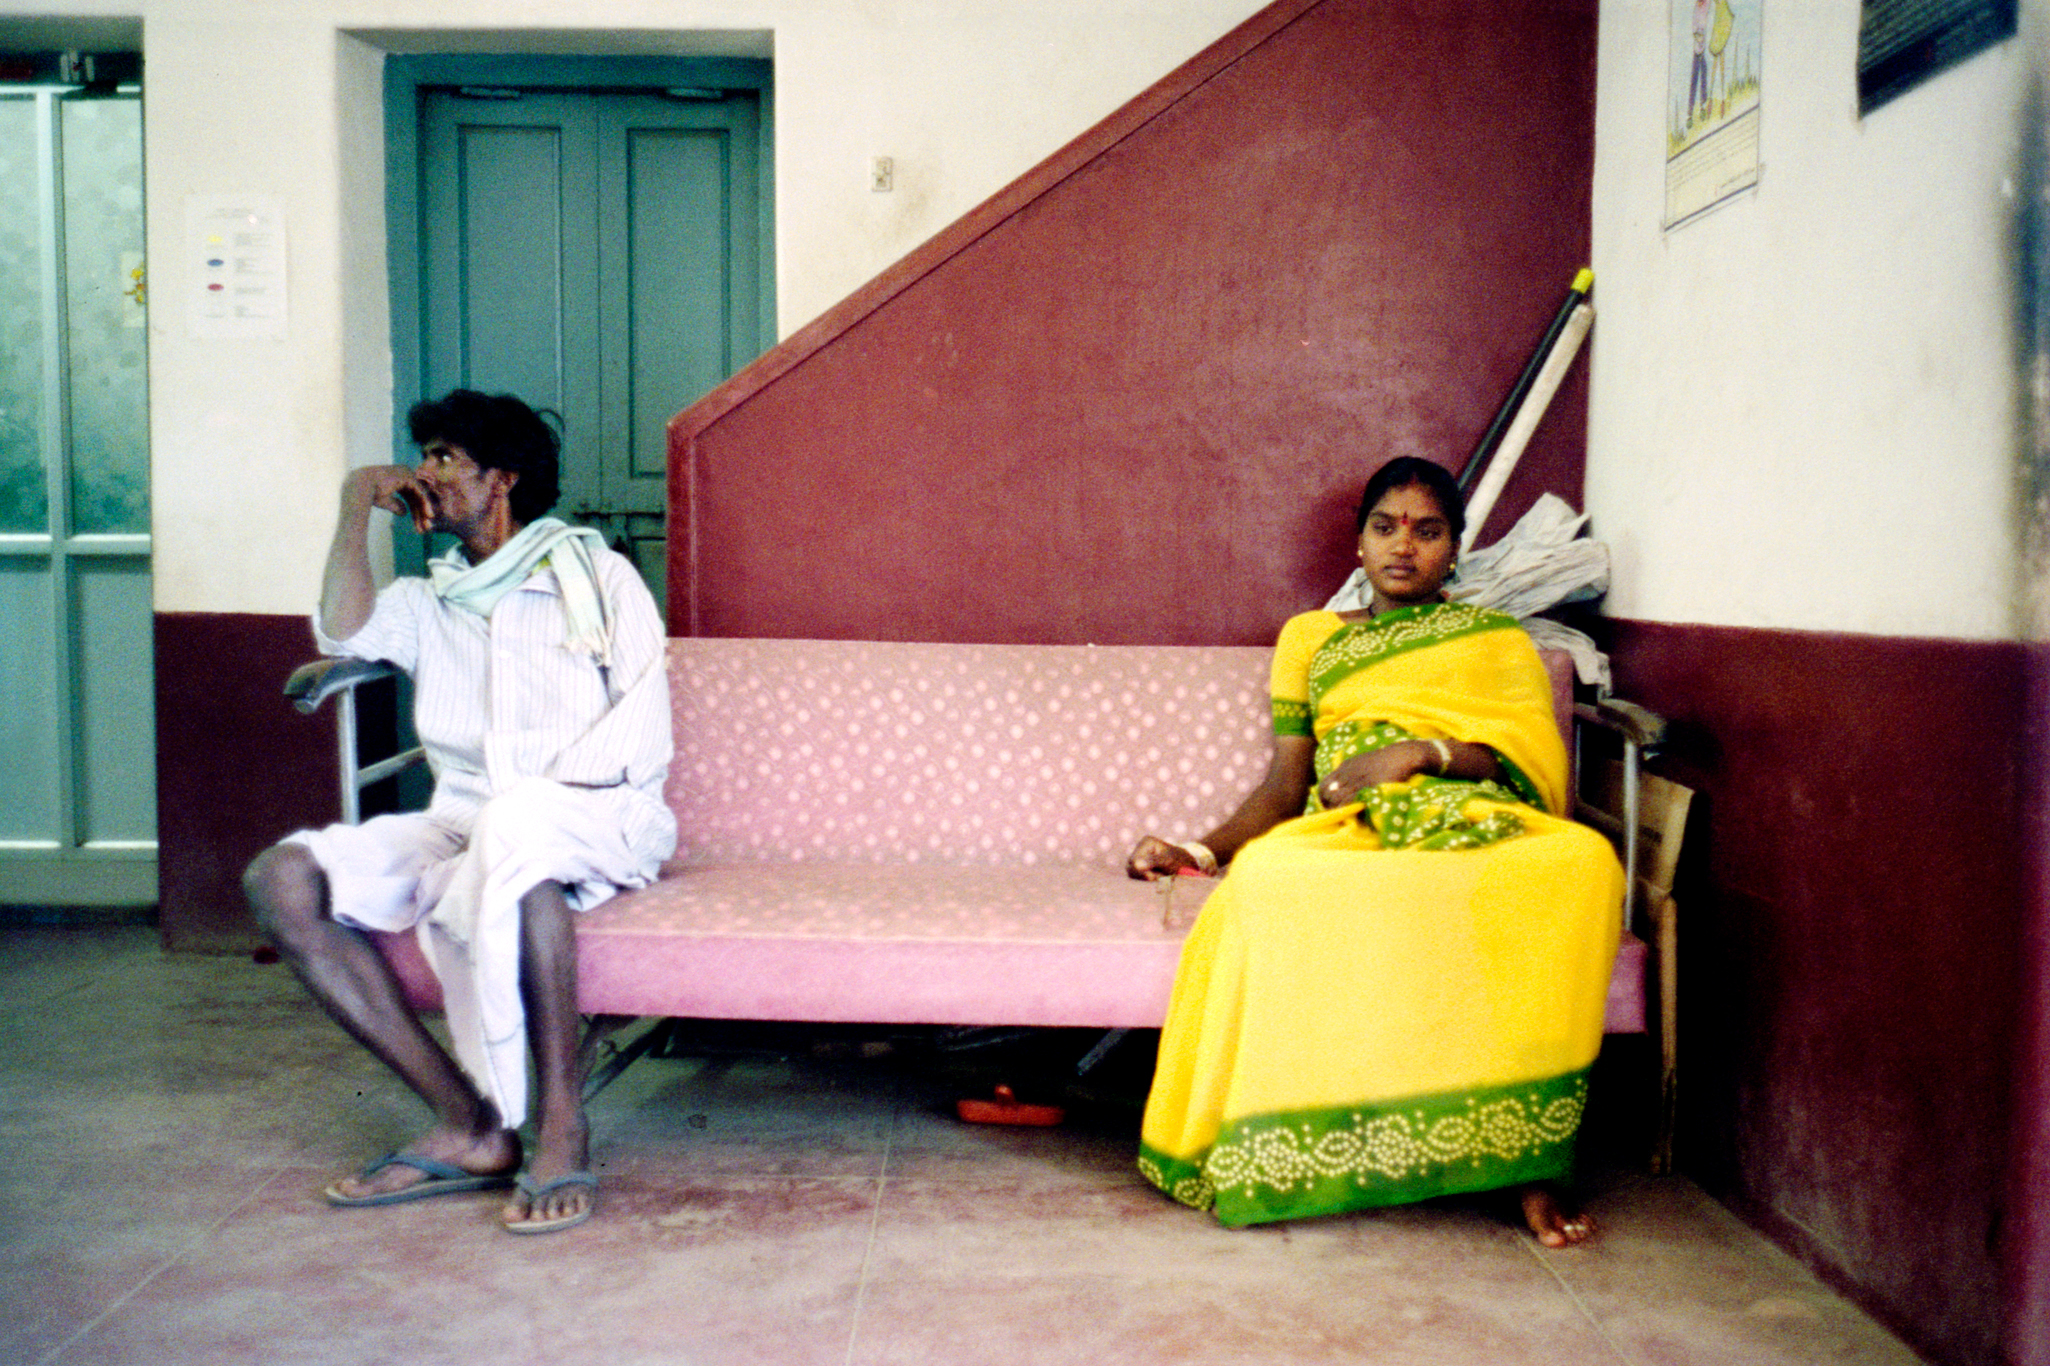  Shobha and her father wait at Asha Kirana, an HIV clinic. Shobha is 19 and has been married for little over a year. She is seven months pregnant and positive. Her husband, a truck-driver, does not want the child. One month later, Shobha will abort h